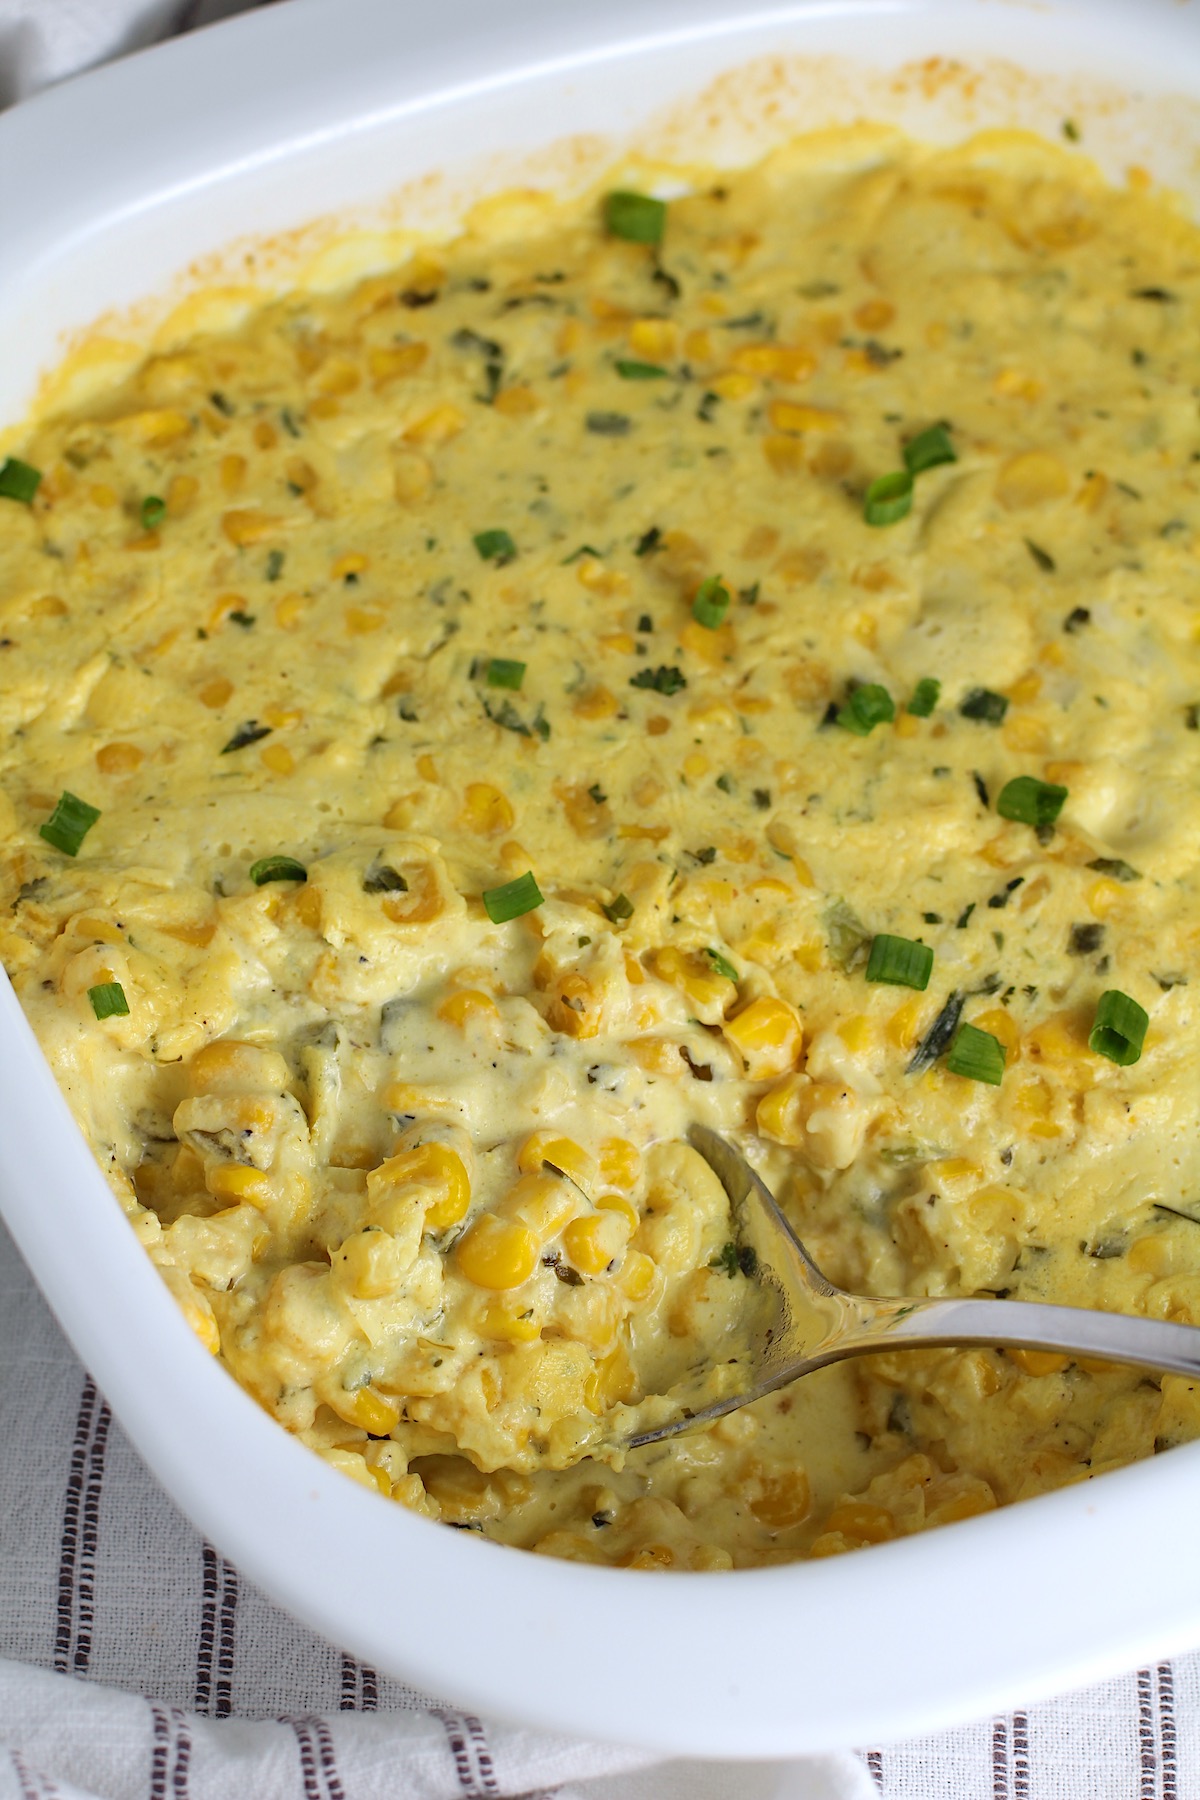 Corn Casserole Recipe with Cream Cheese and scallion slices on top in casserole dish with a spoon scooping some from the corner.